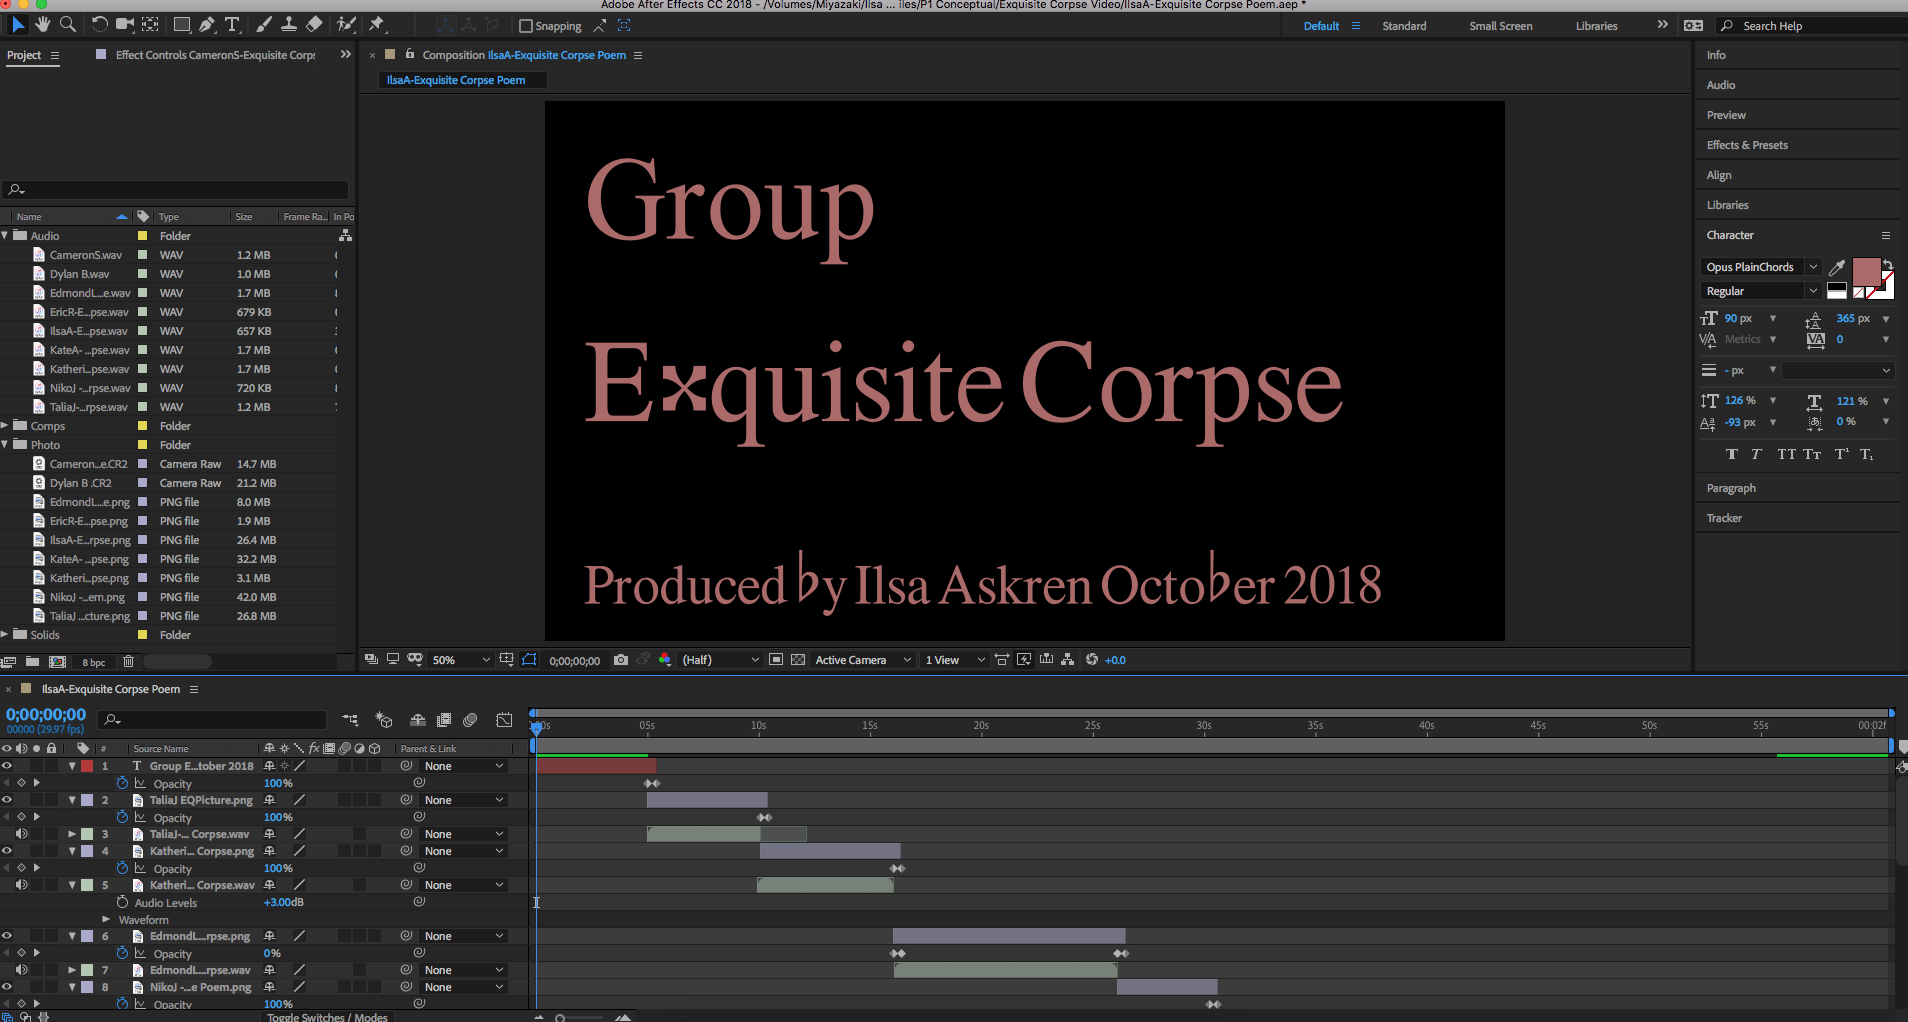 A screenshot showing how After Effects looks with image/text content